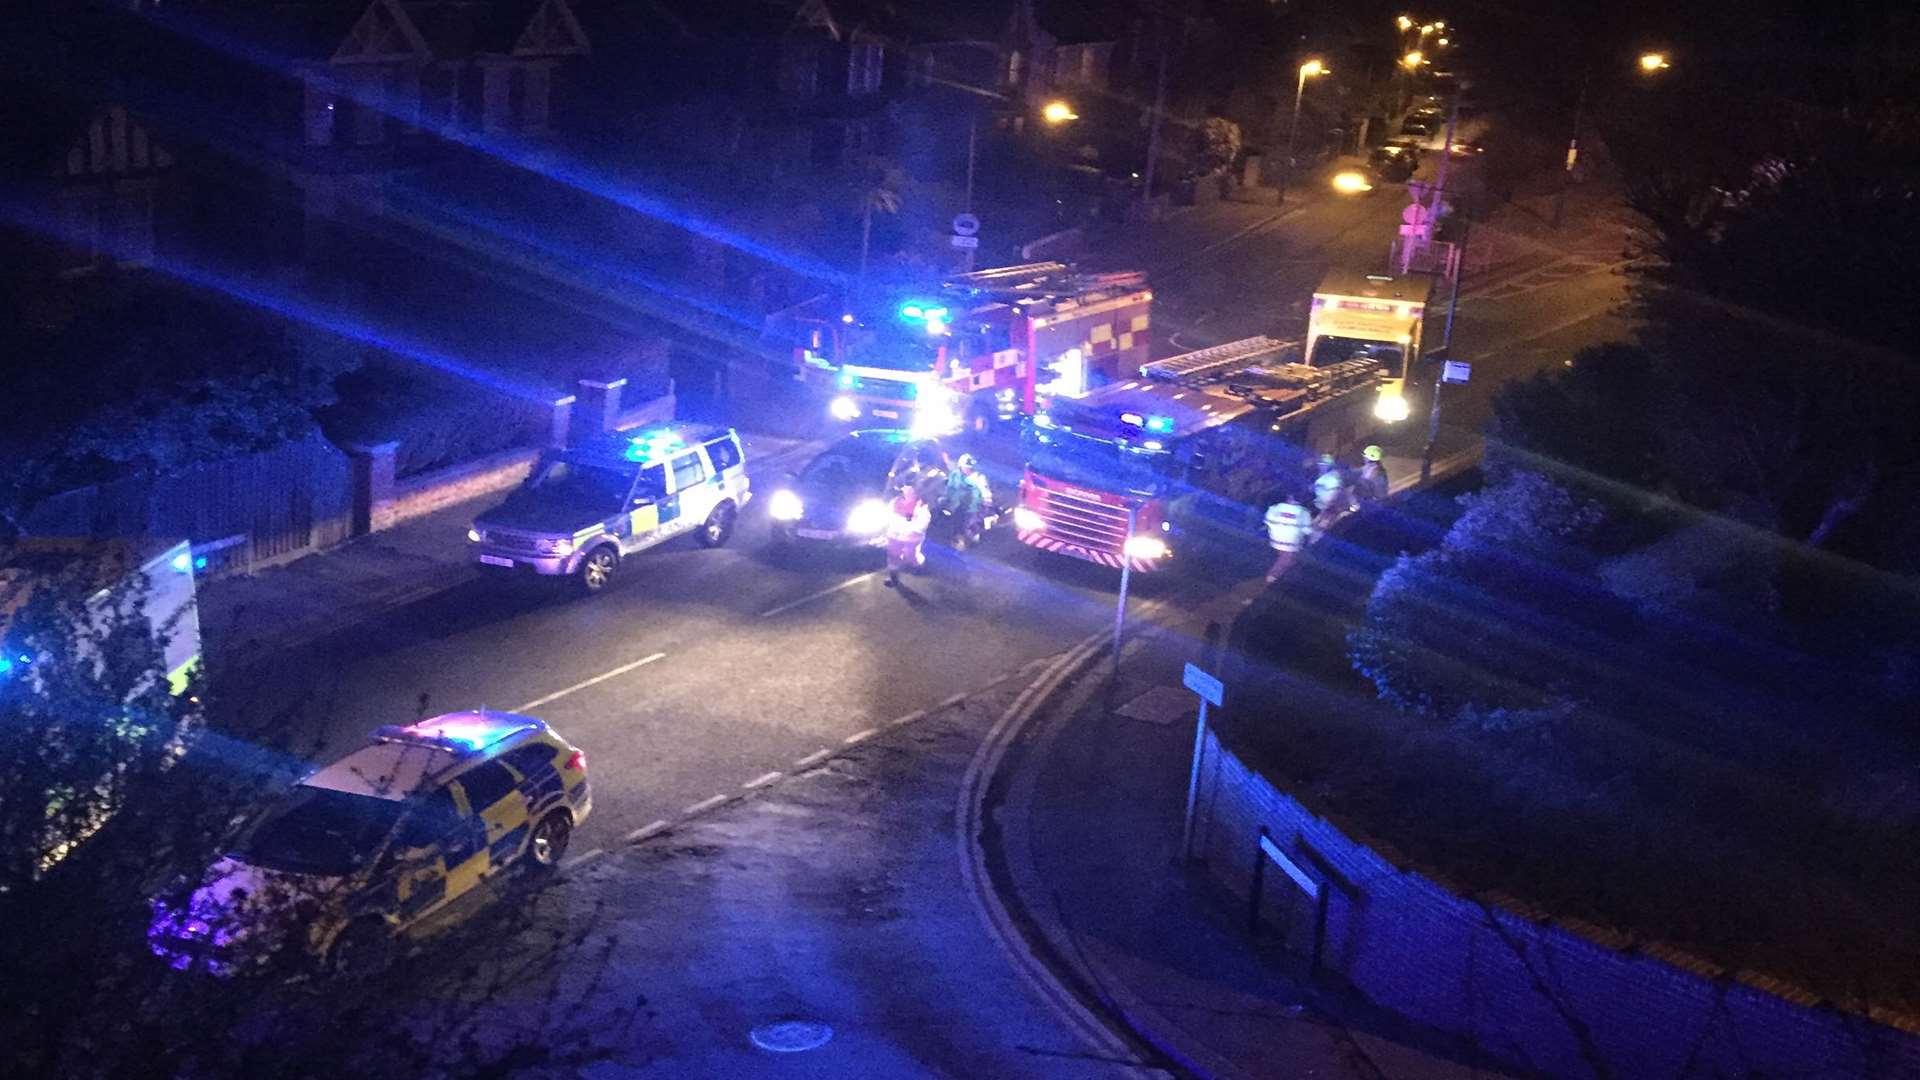 Philip Price took these photos of the emergency services at the scene